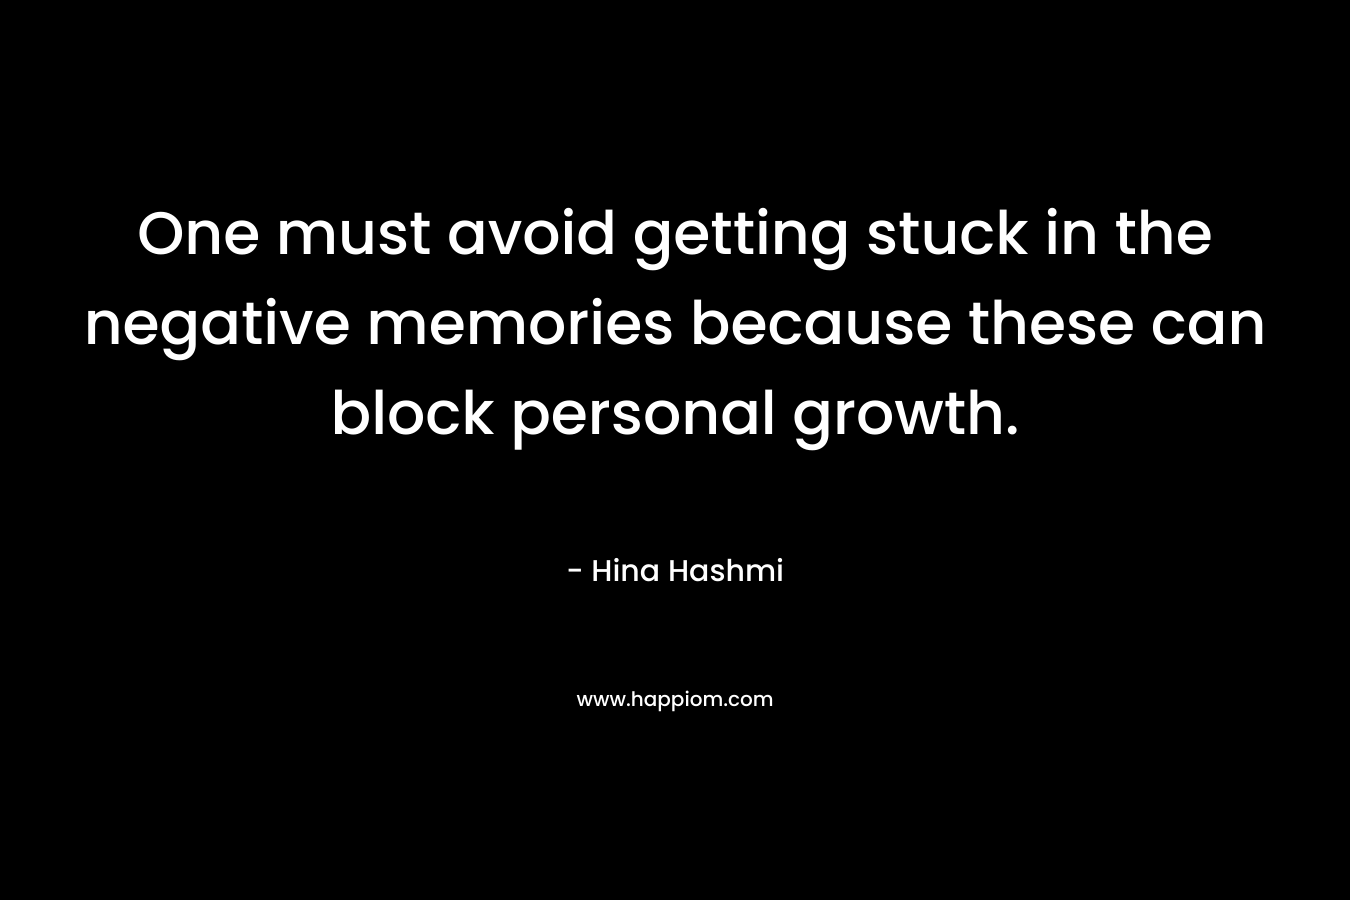 One must avoid getting stuck in the negative memories because these can block personal growth.